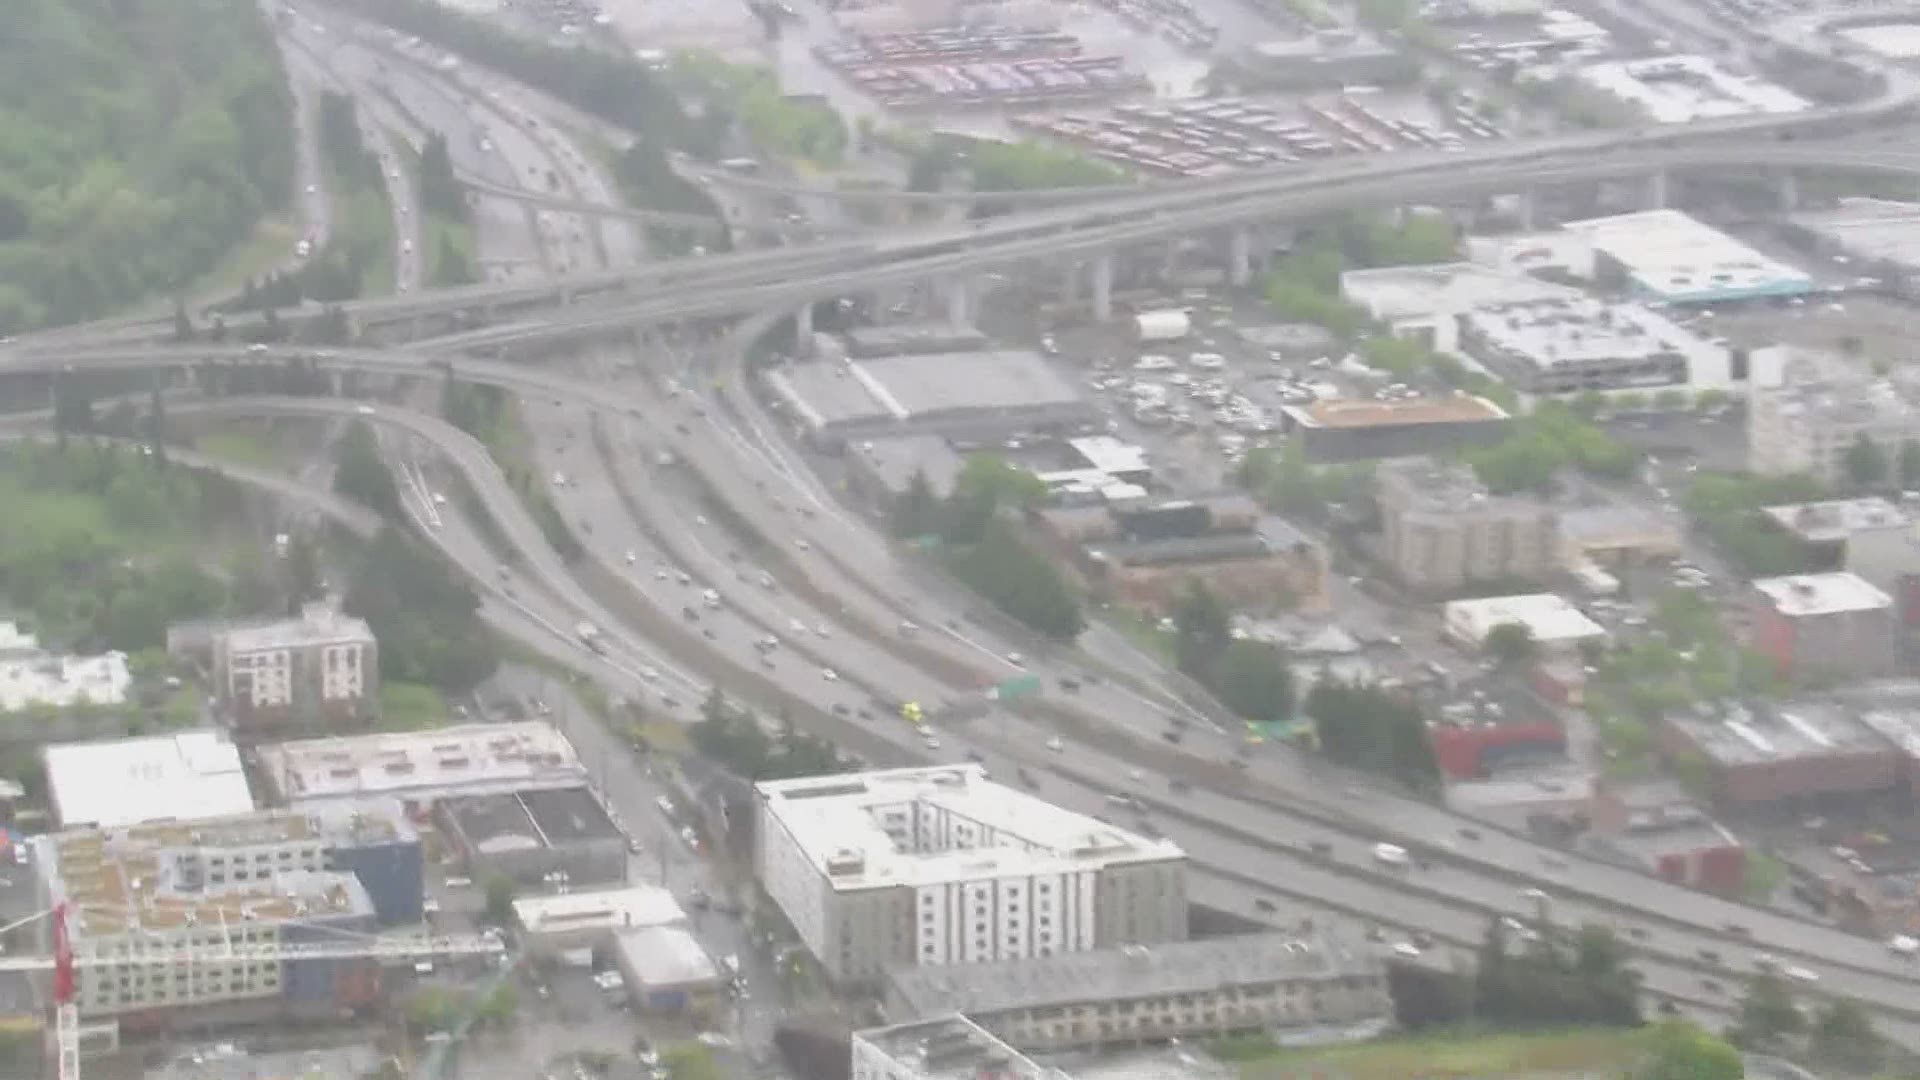 Closures will reduce I-5 southbound traffic to one lane between I-90 and S Spokane Street.